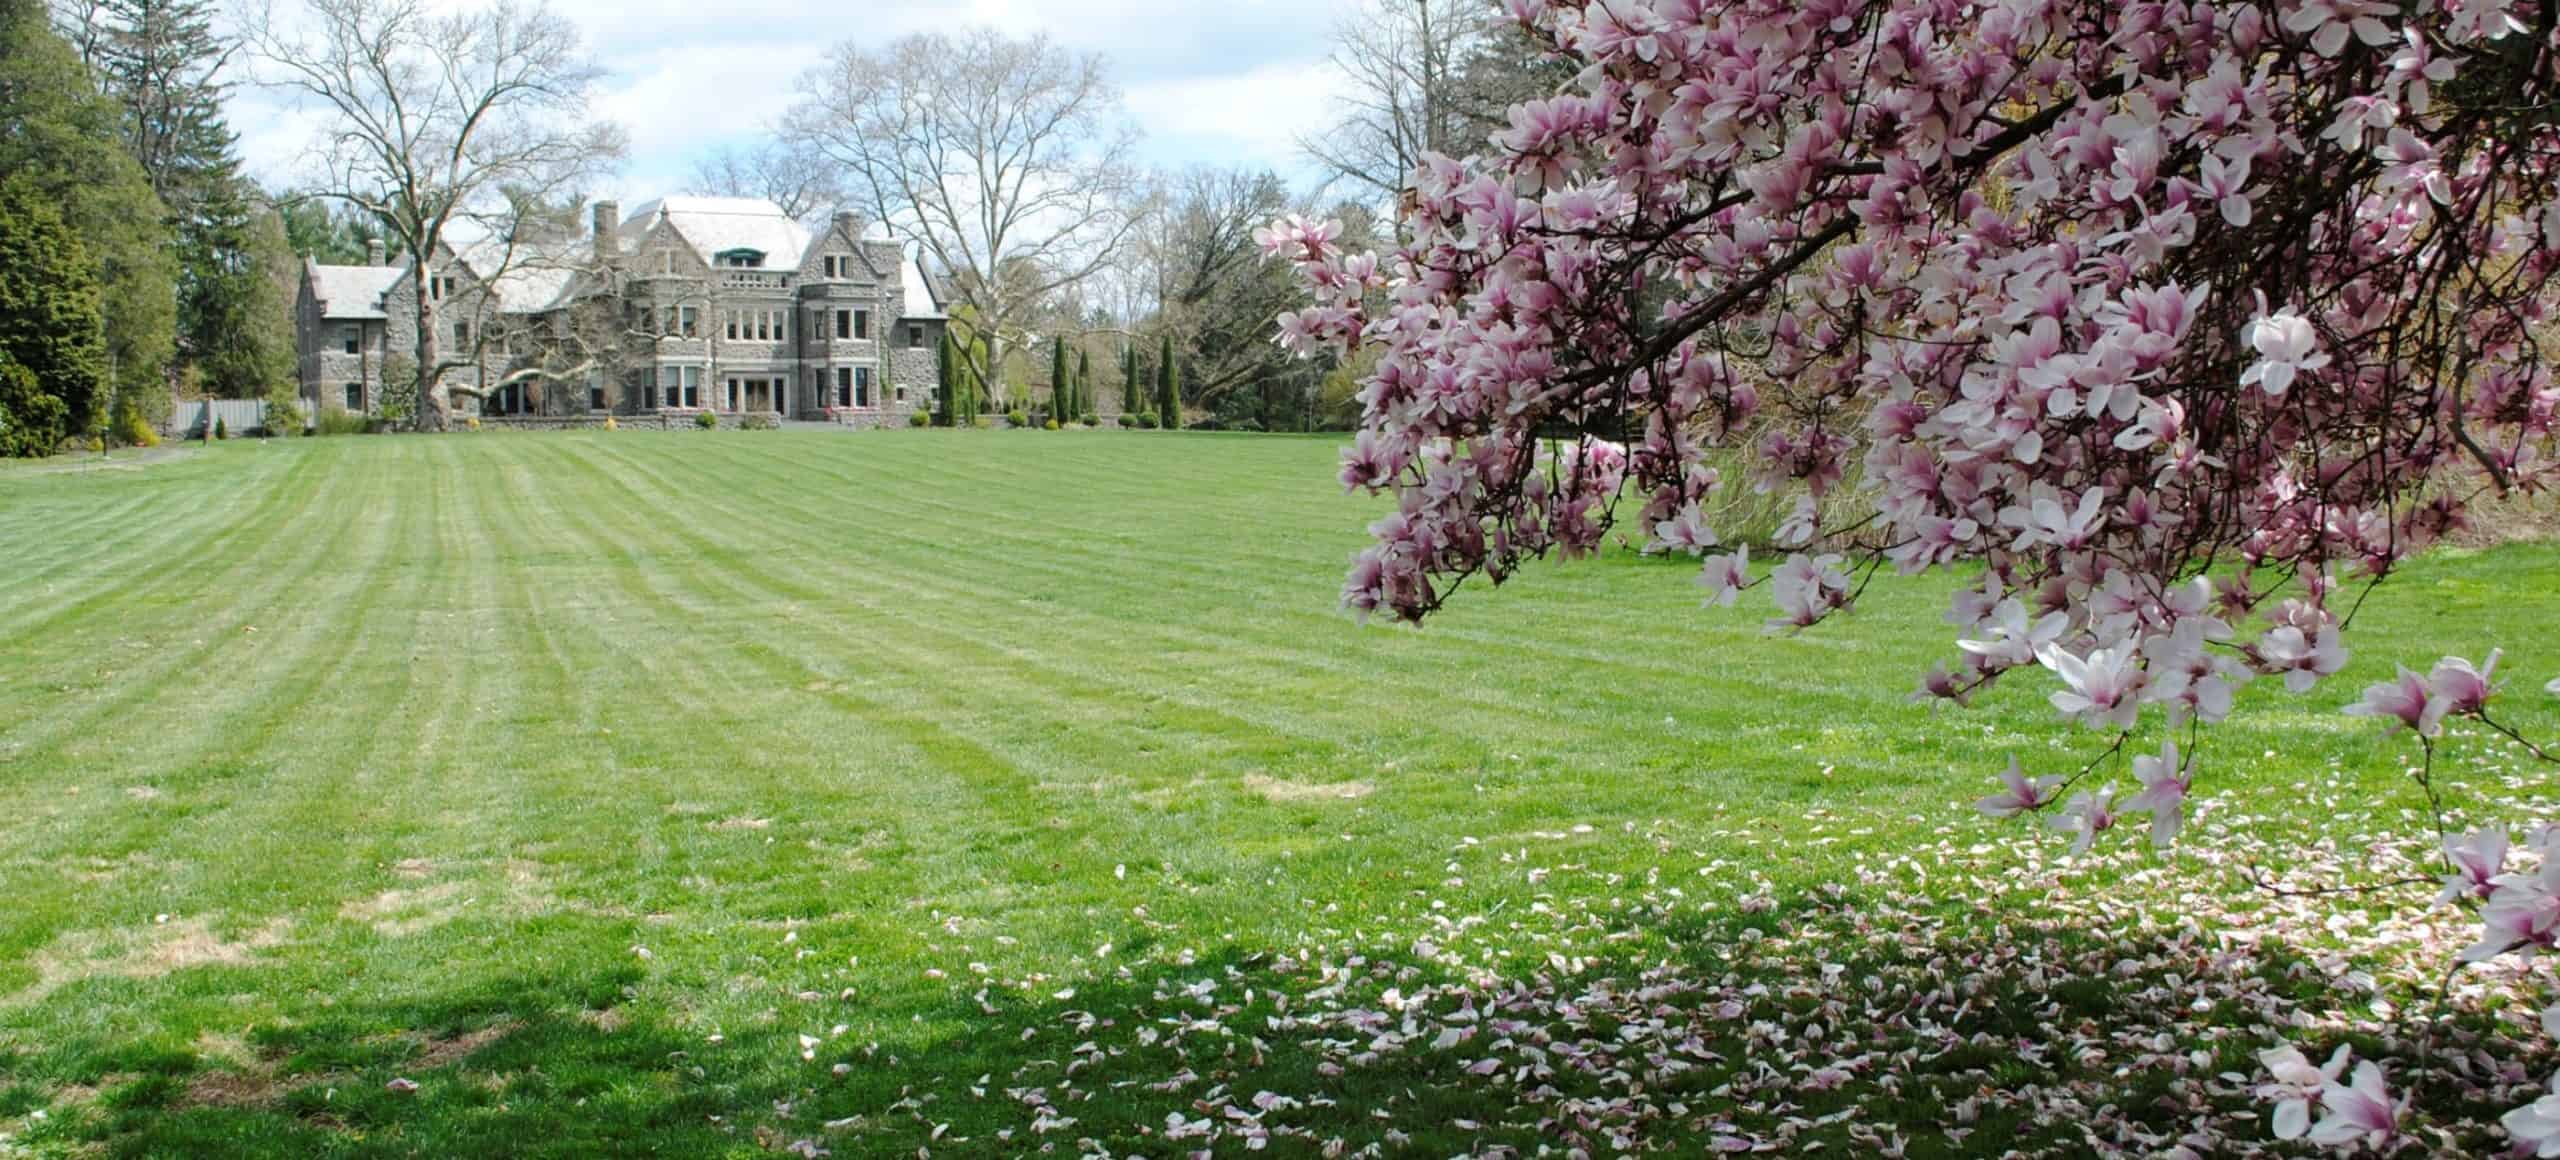 A magnolia tree with it's pink blossoms in the foreground. Some of the blossoms have fallen on a grassy lawn. In the background is a large stone mansion.